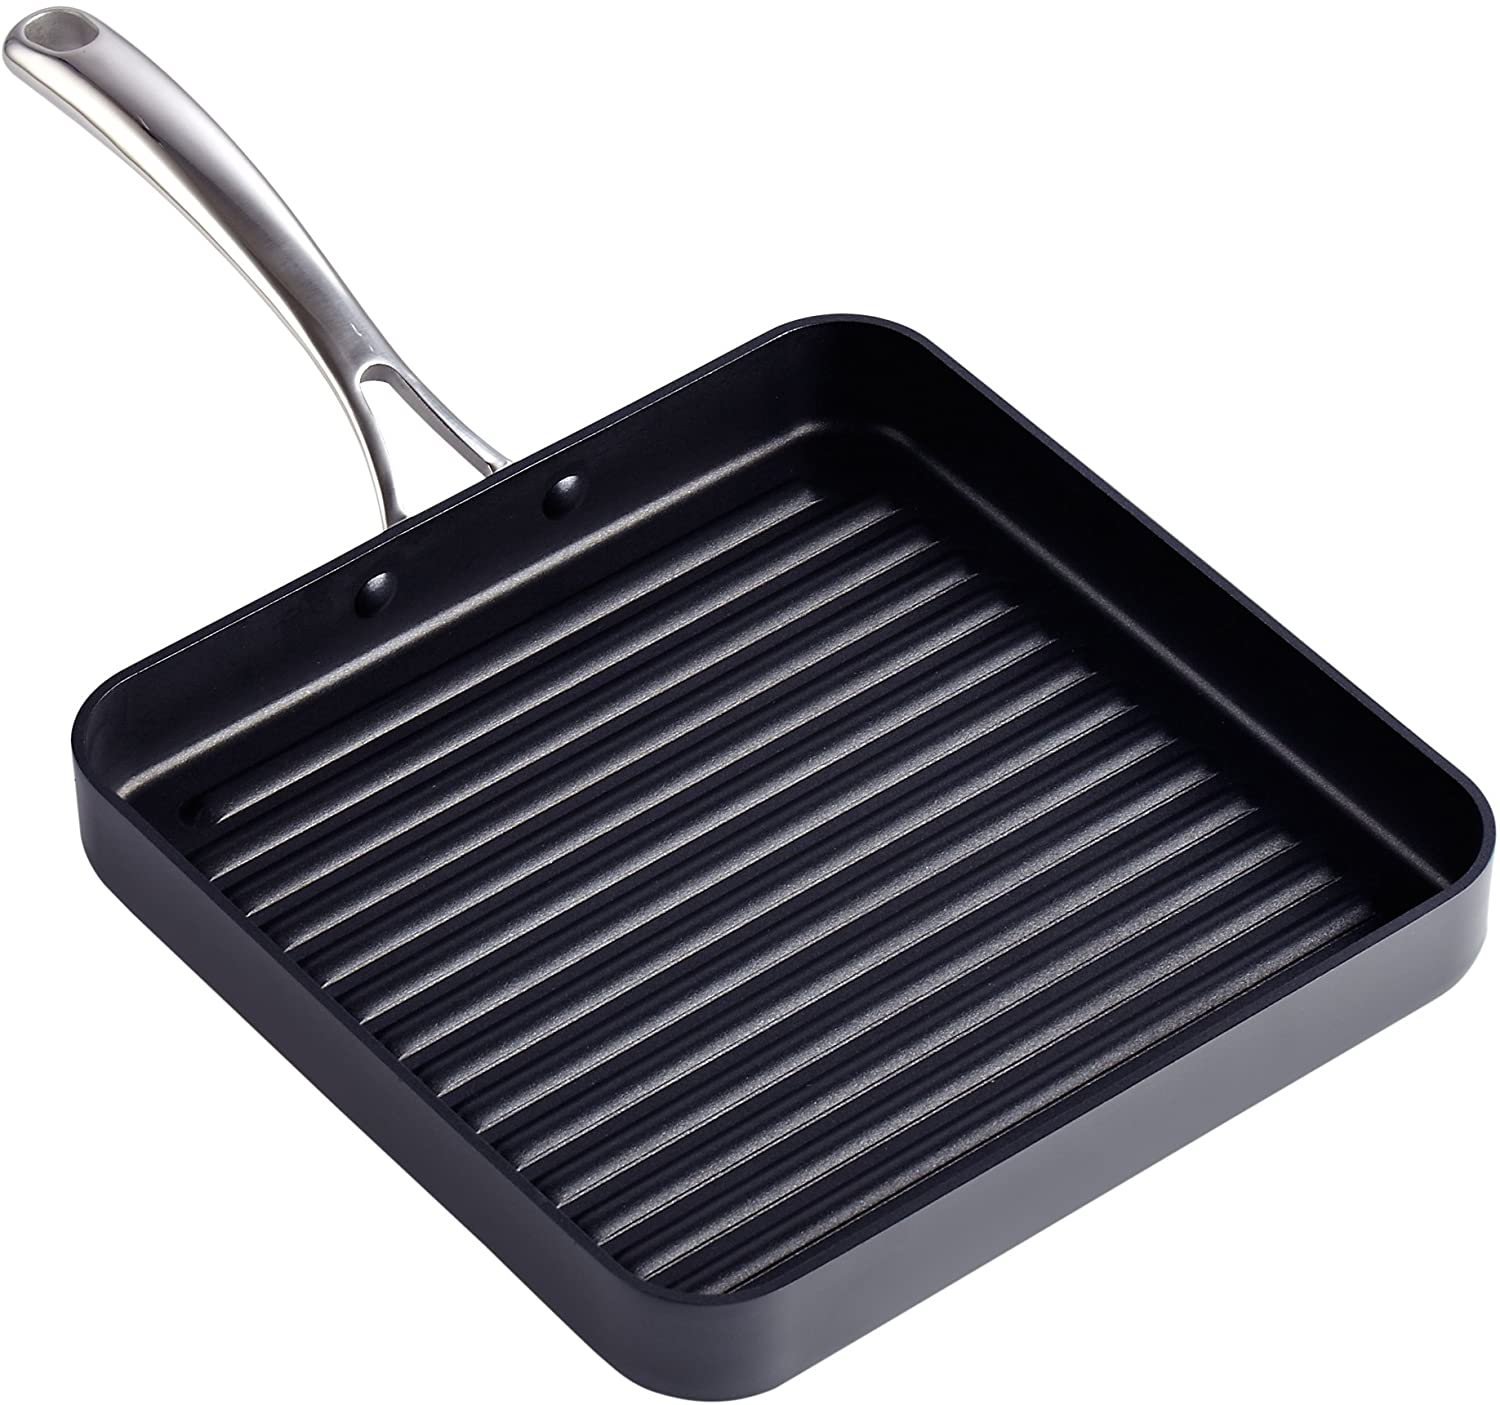 Cooks Standard Nonstick Square Grill Pan 11 x 11-Inch, Hard Anodized G